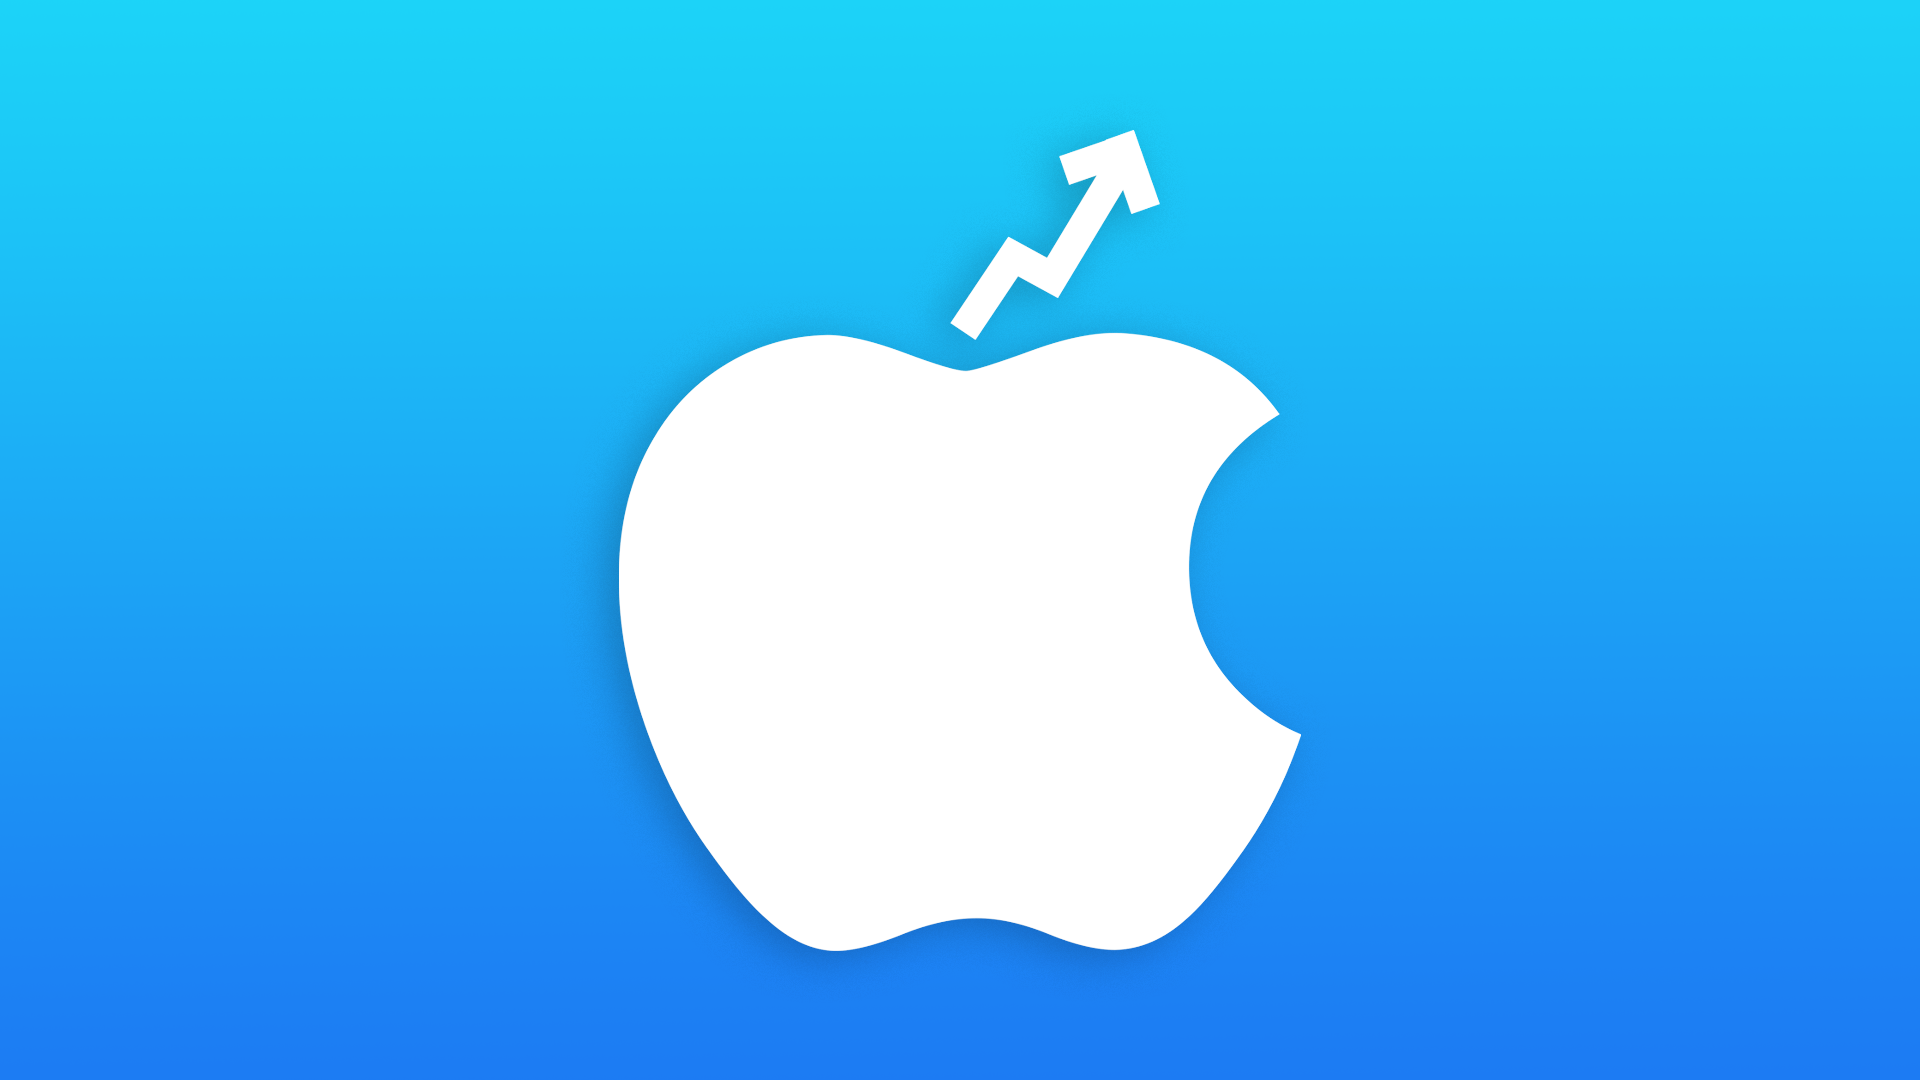 Illustration of Apple's logo, with the stem of the Apple resembling an upward stock arrow